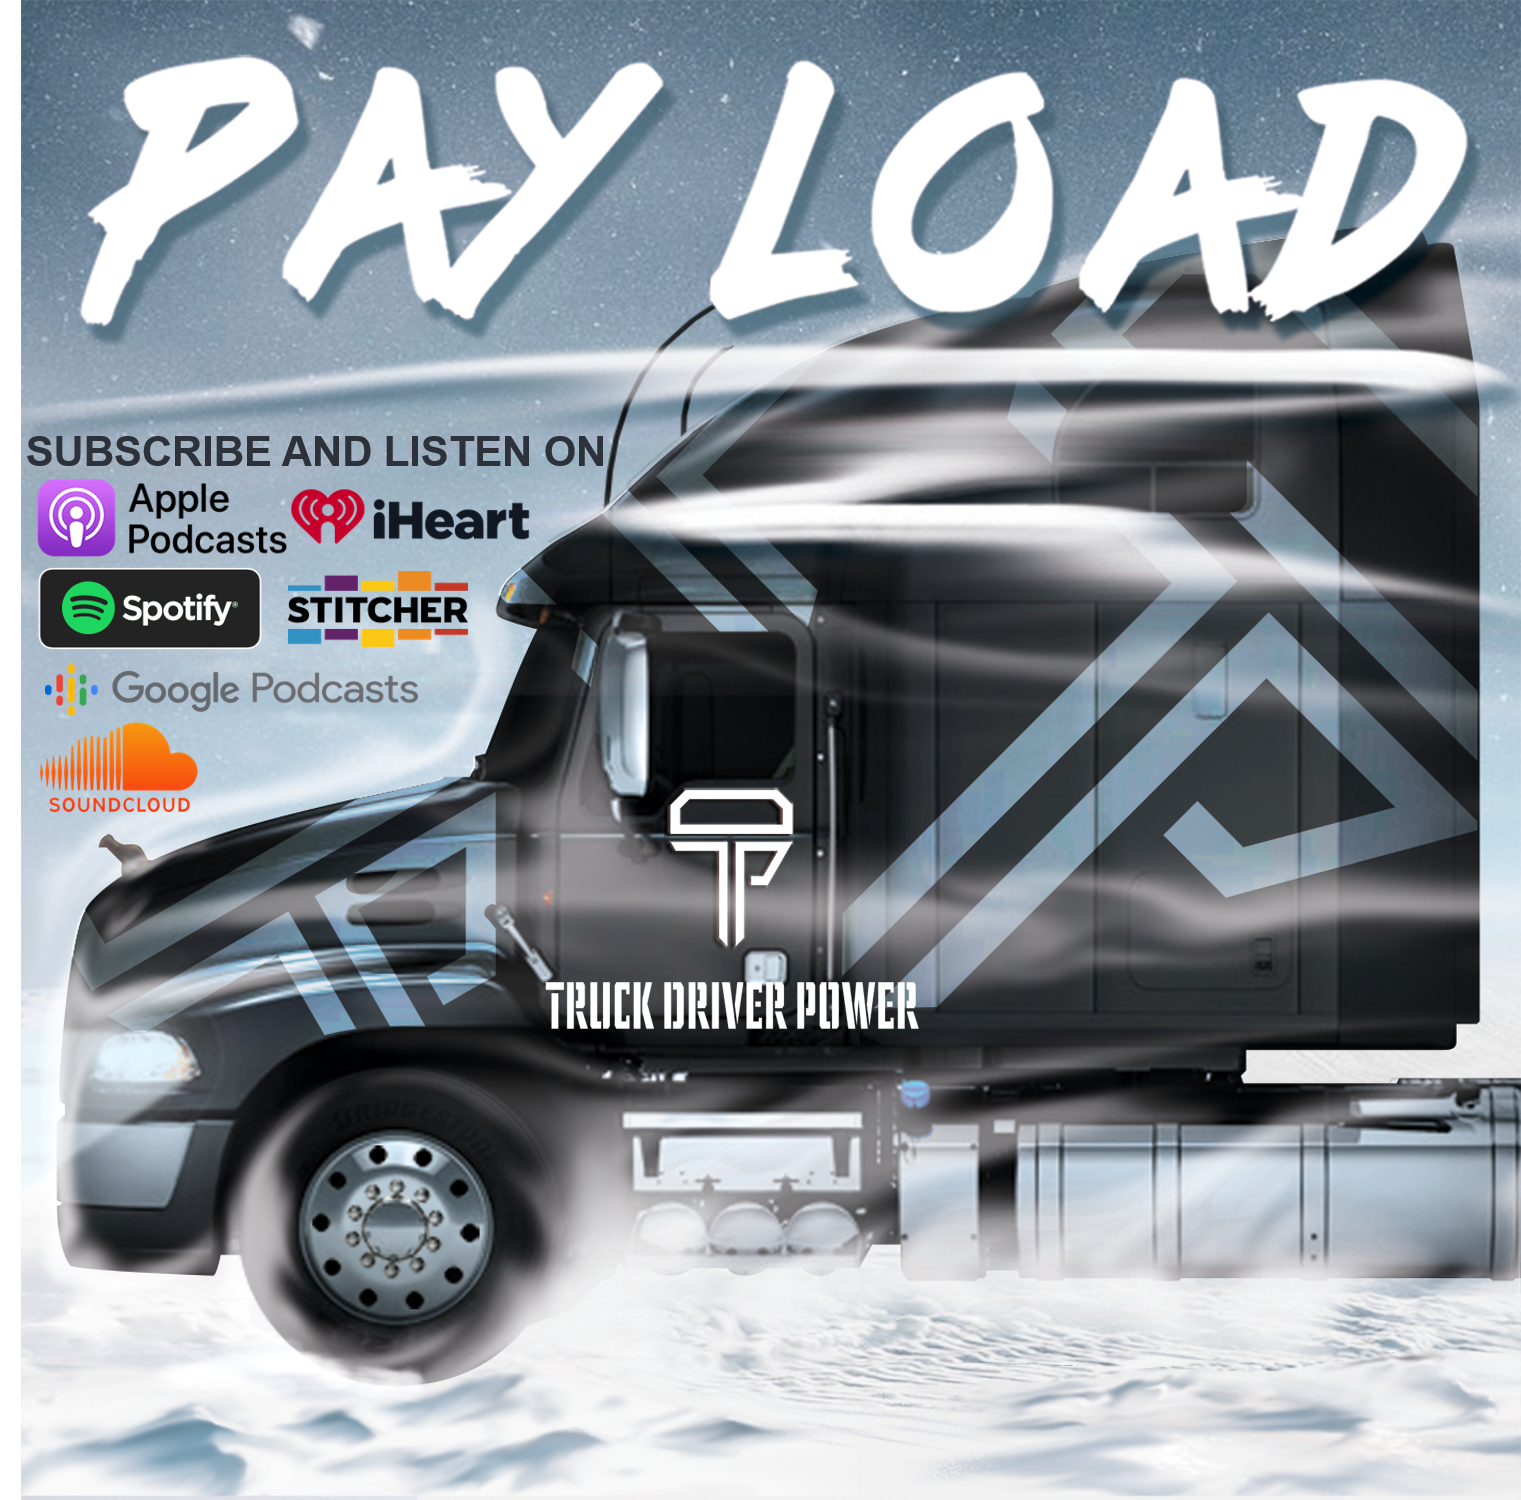 Payload Podcast Showart with Destination Logos 